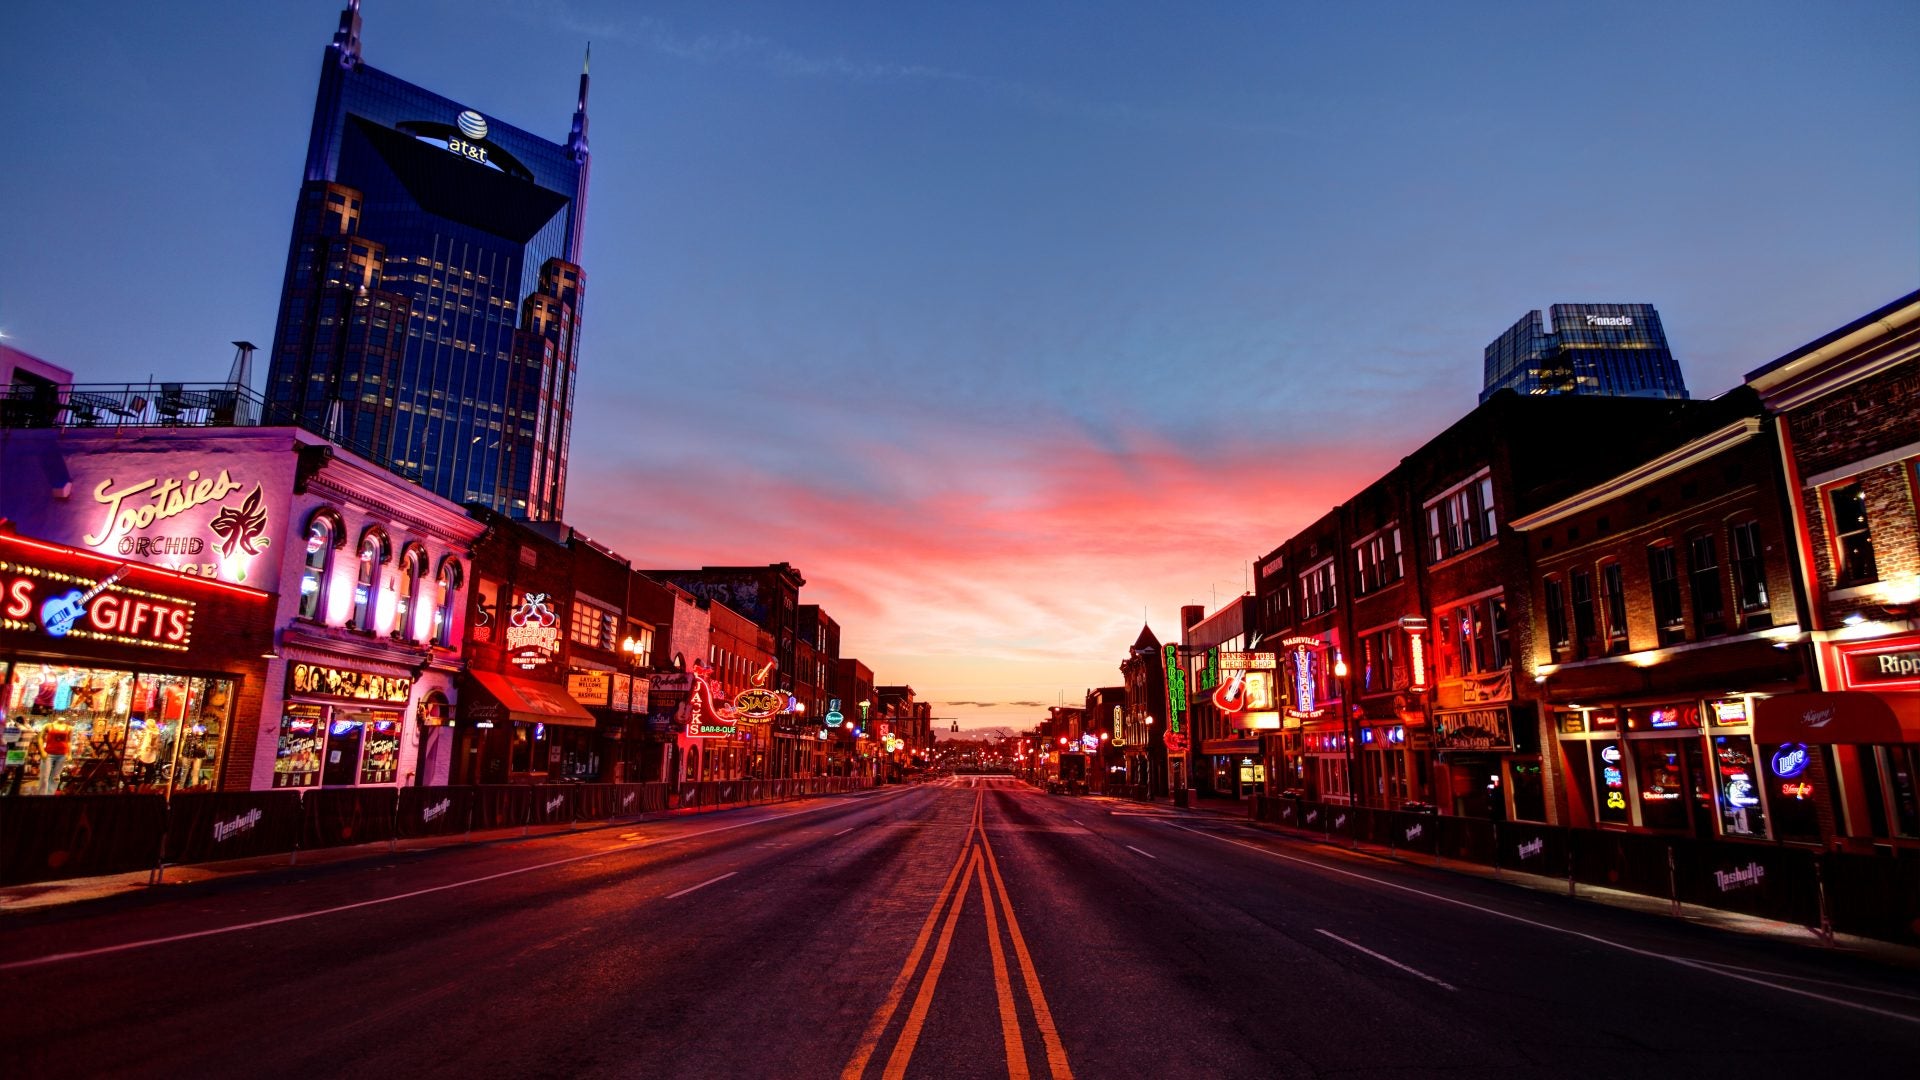 A Black Woman’s Guide to Visiting Nashville